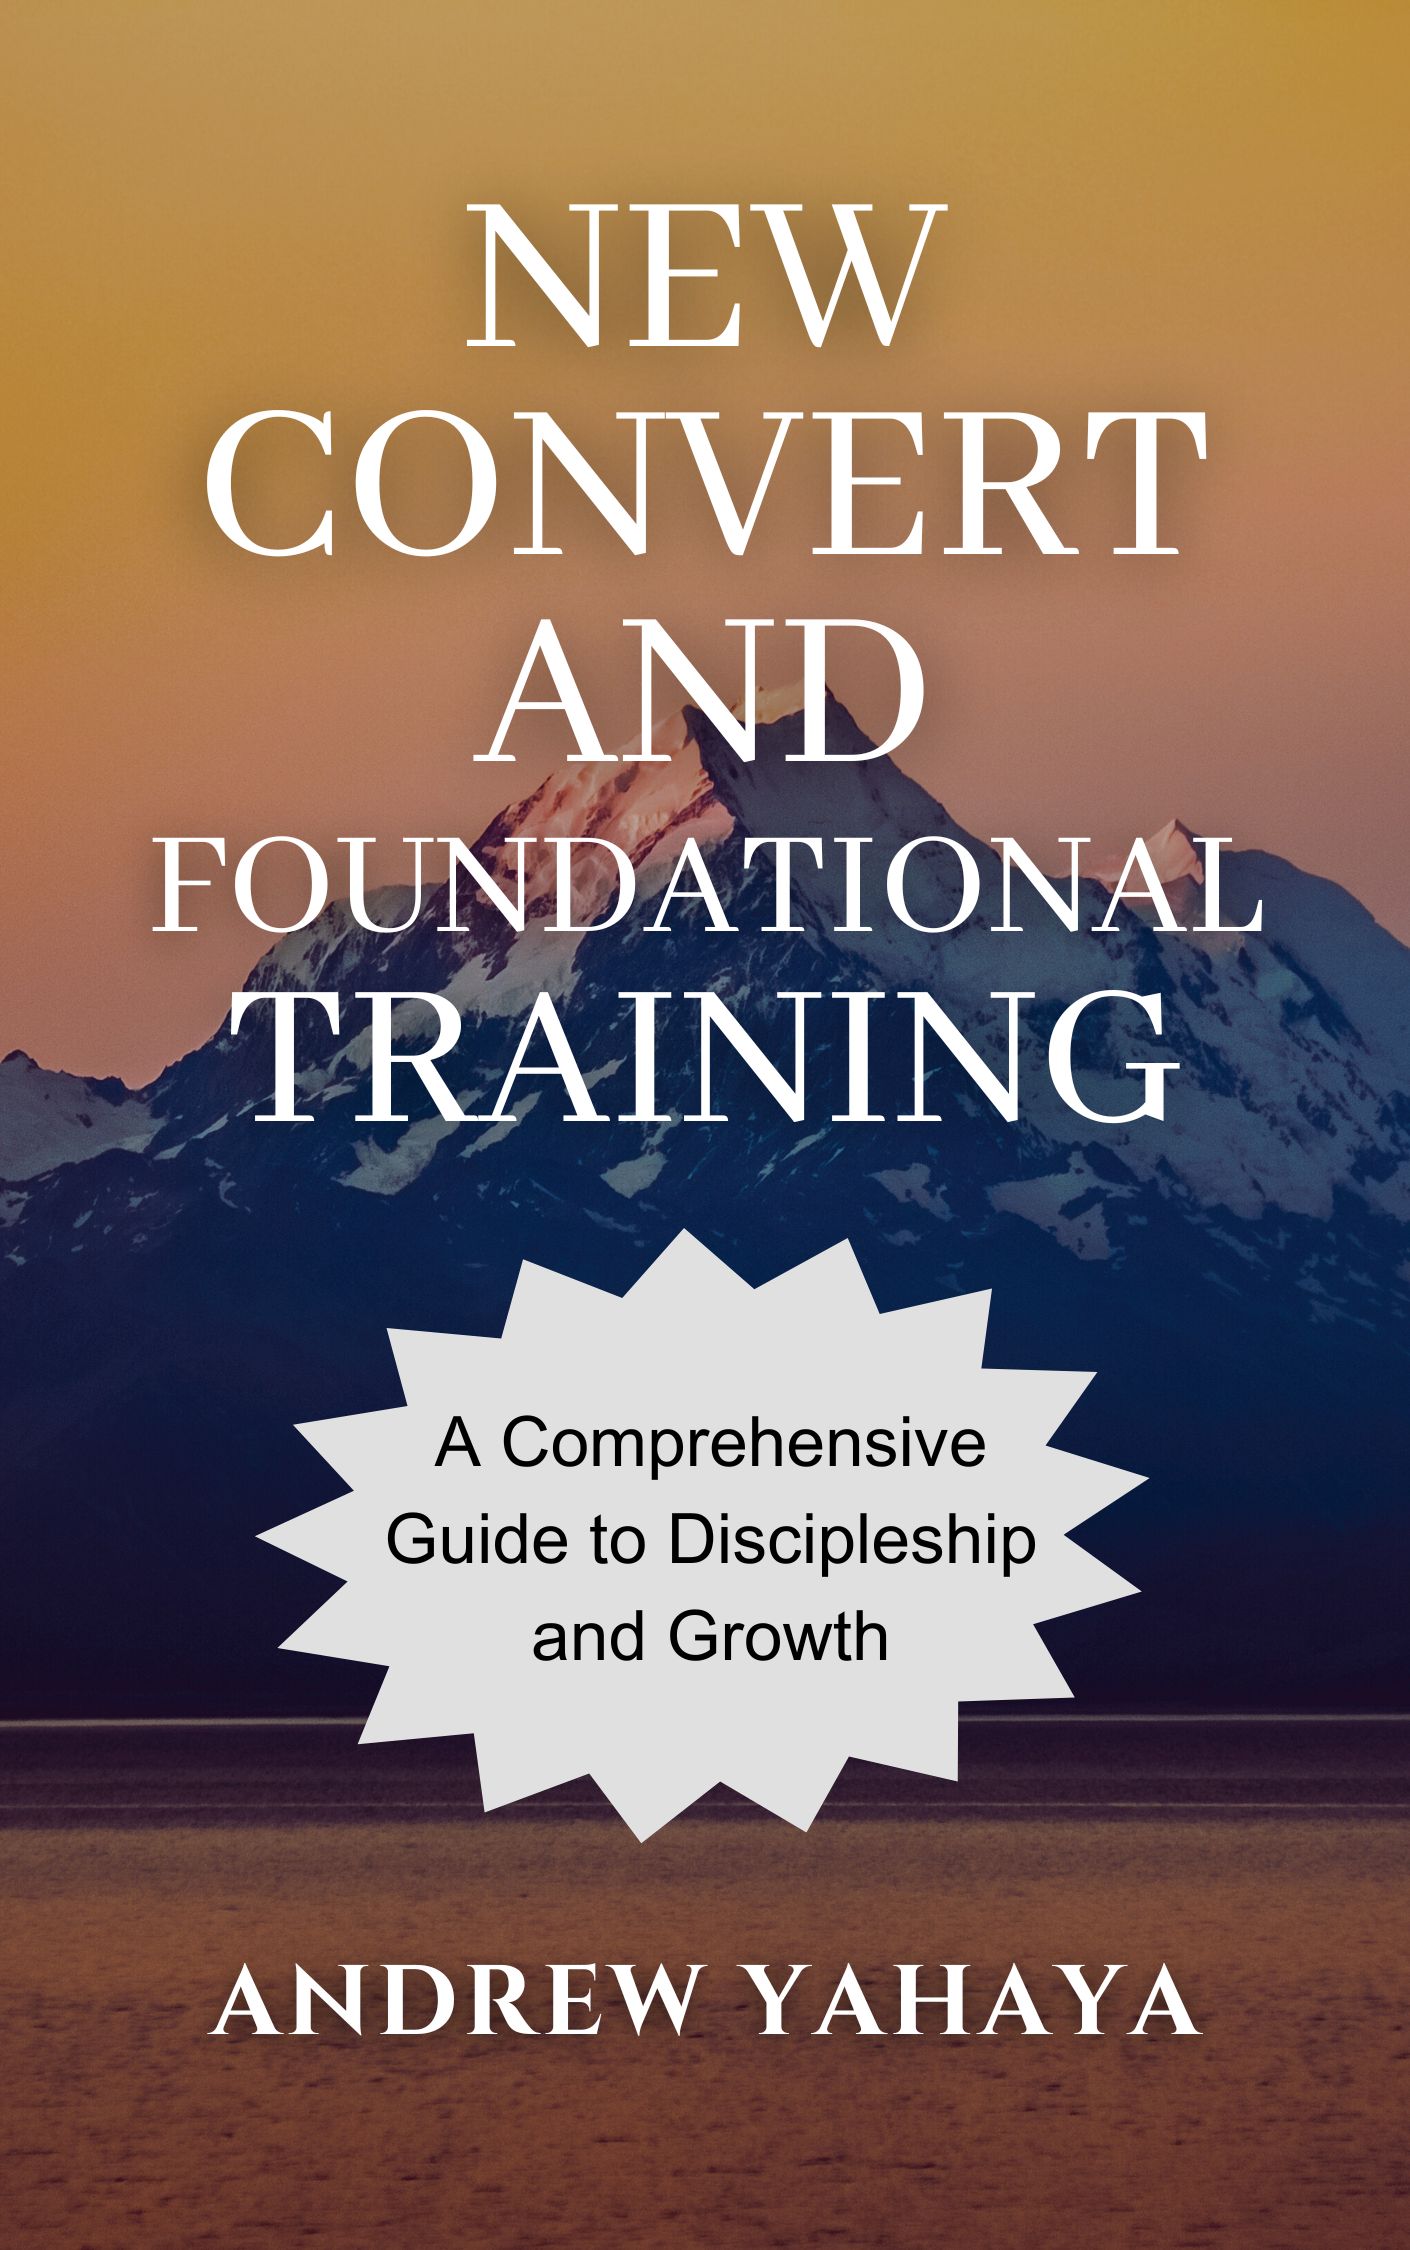 New-Convert-and-Foundational-Training--A-Comprehensive-Guide-To-Discipleship-And-Growth